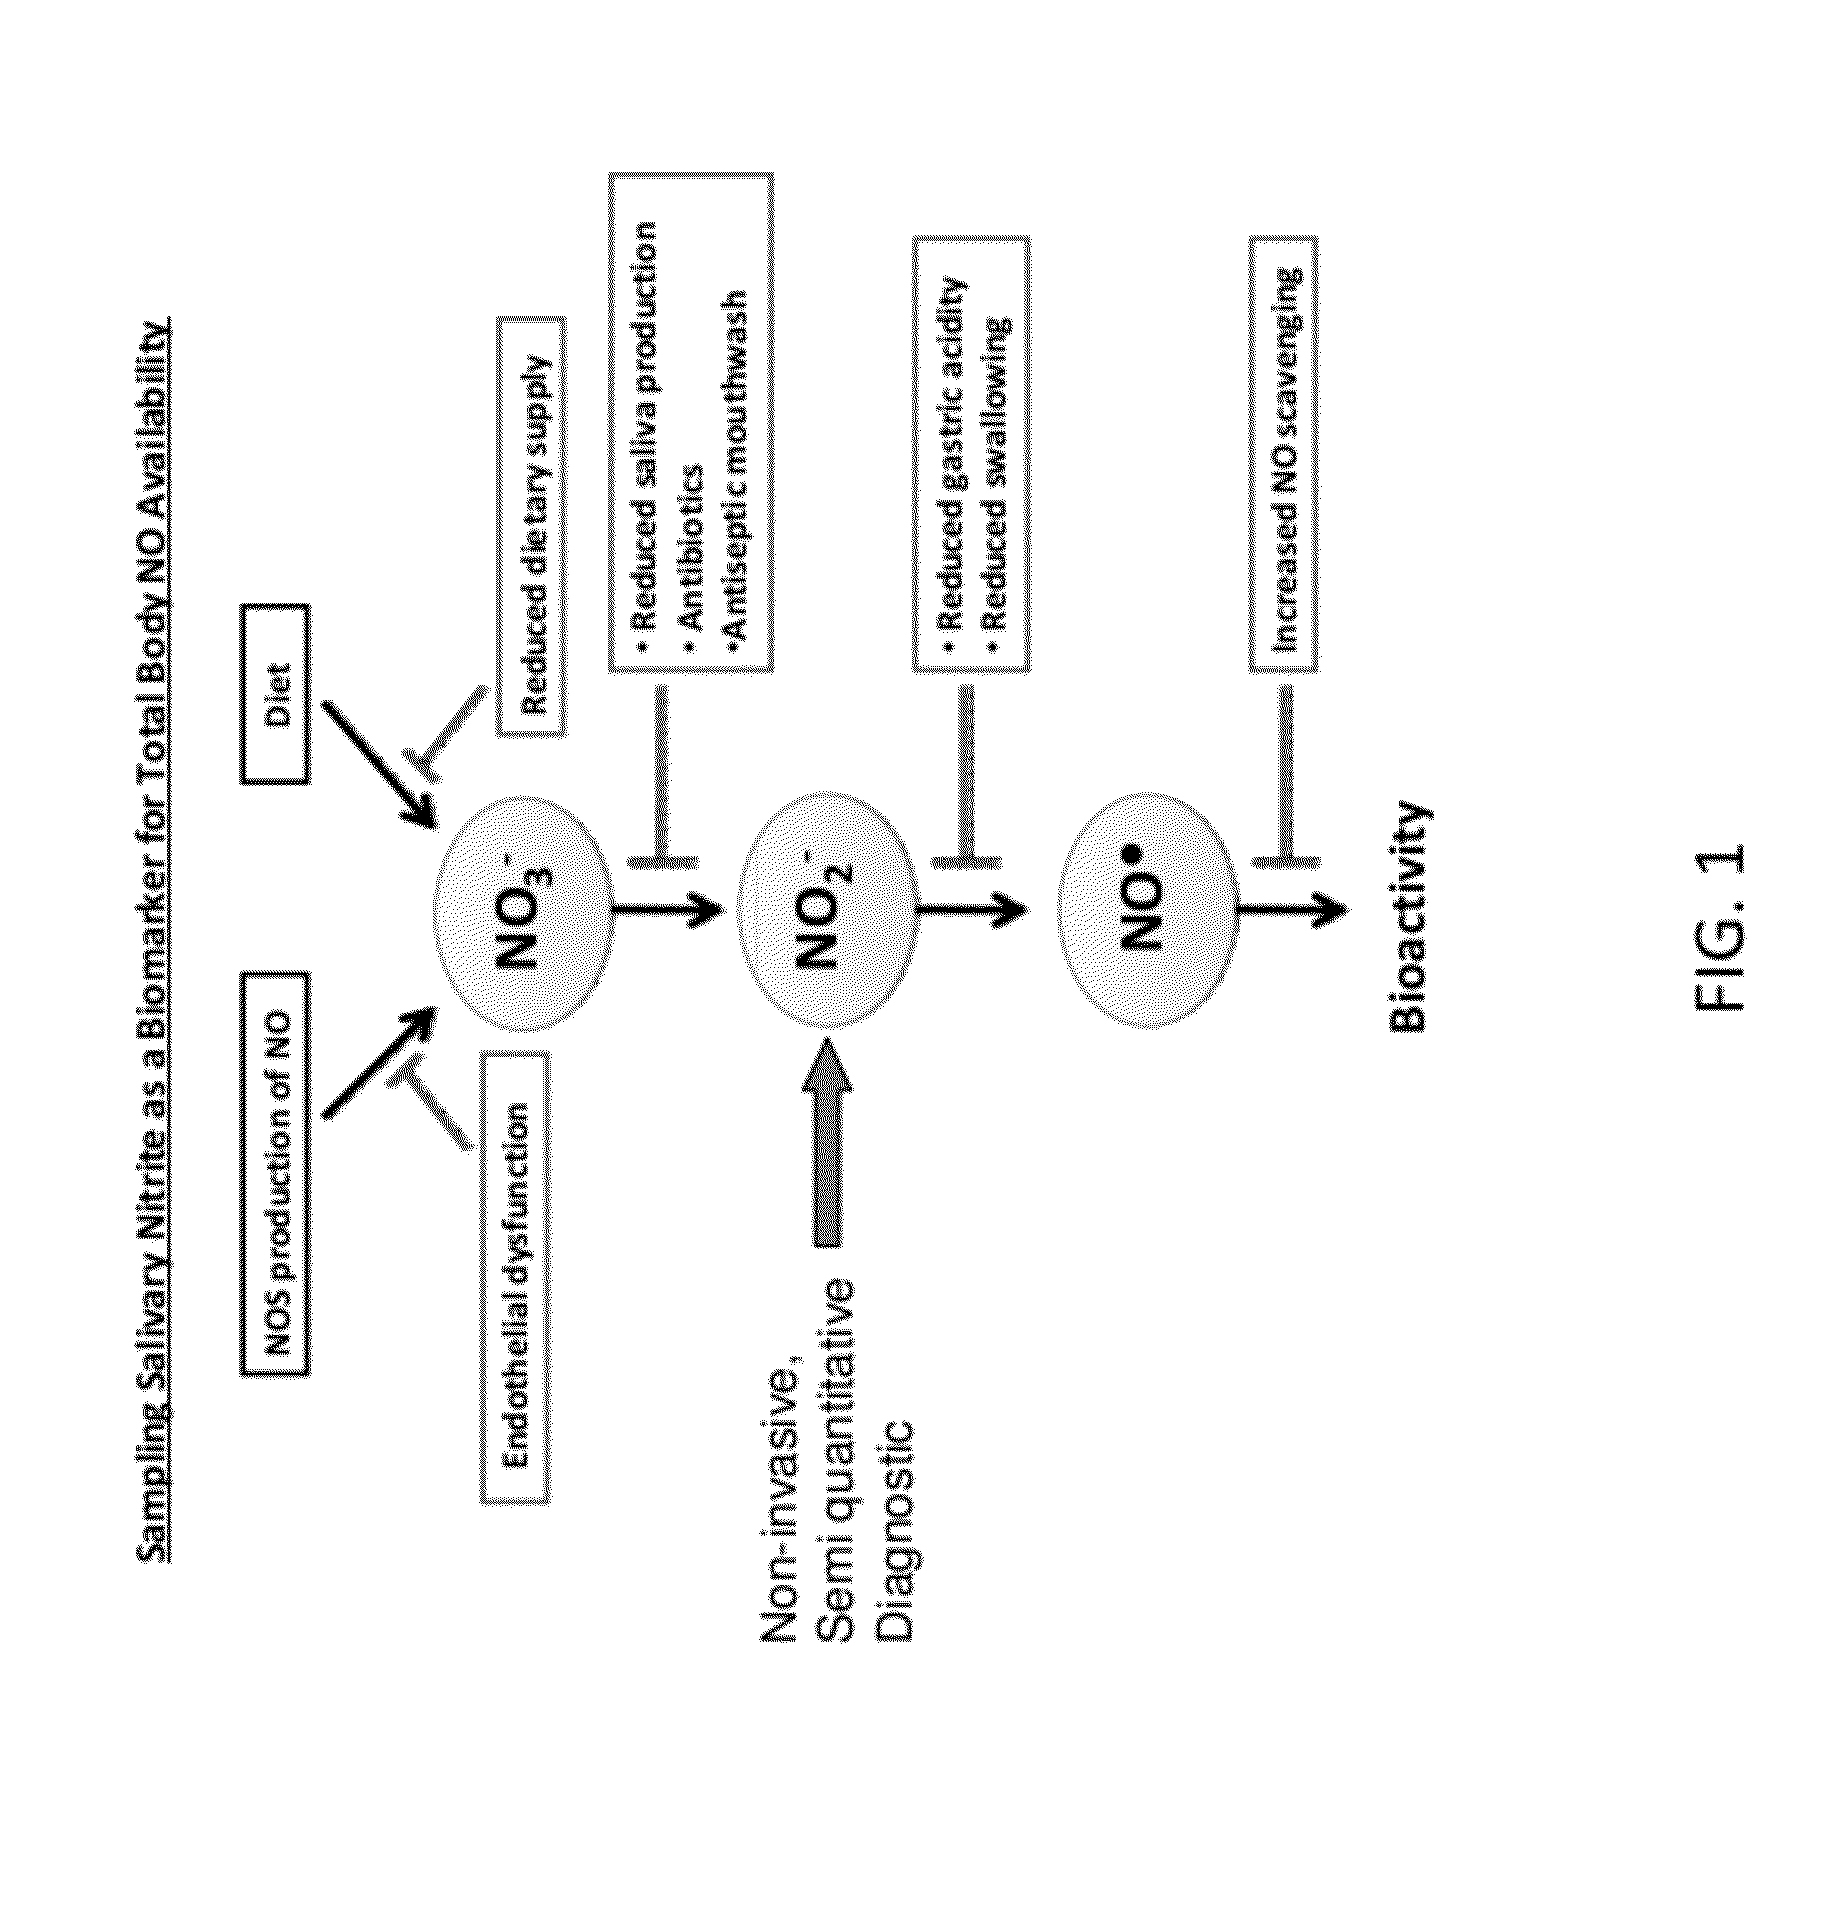 Method of Measuring and Monitoring In Vivo Nitrite Levels